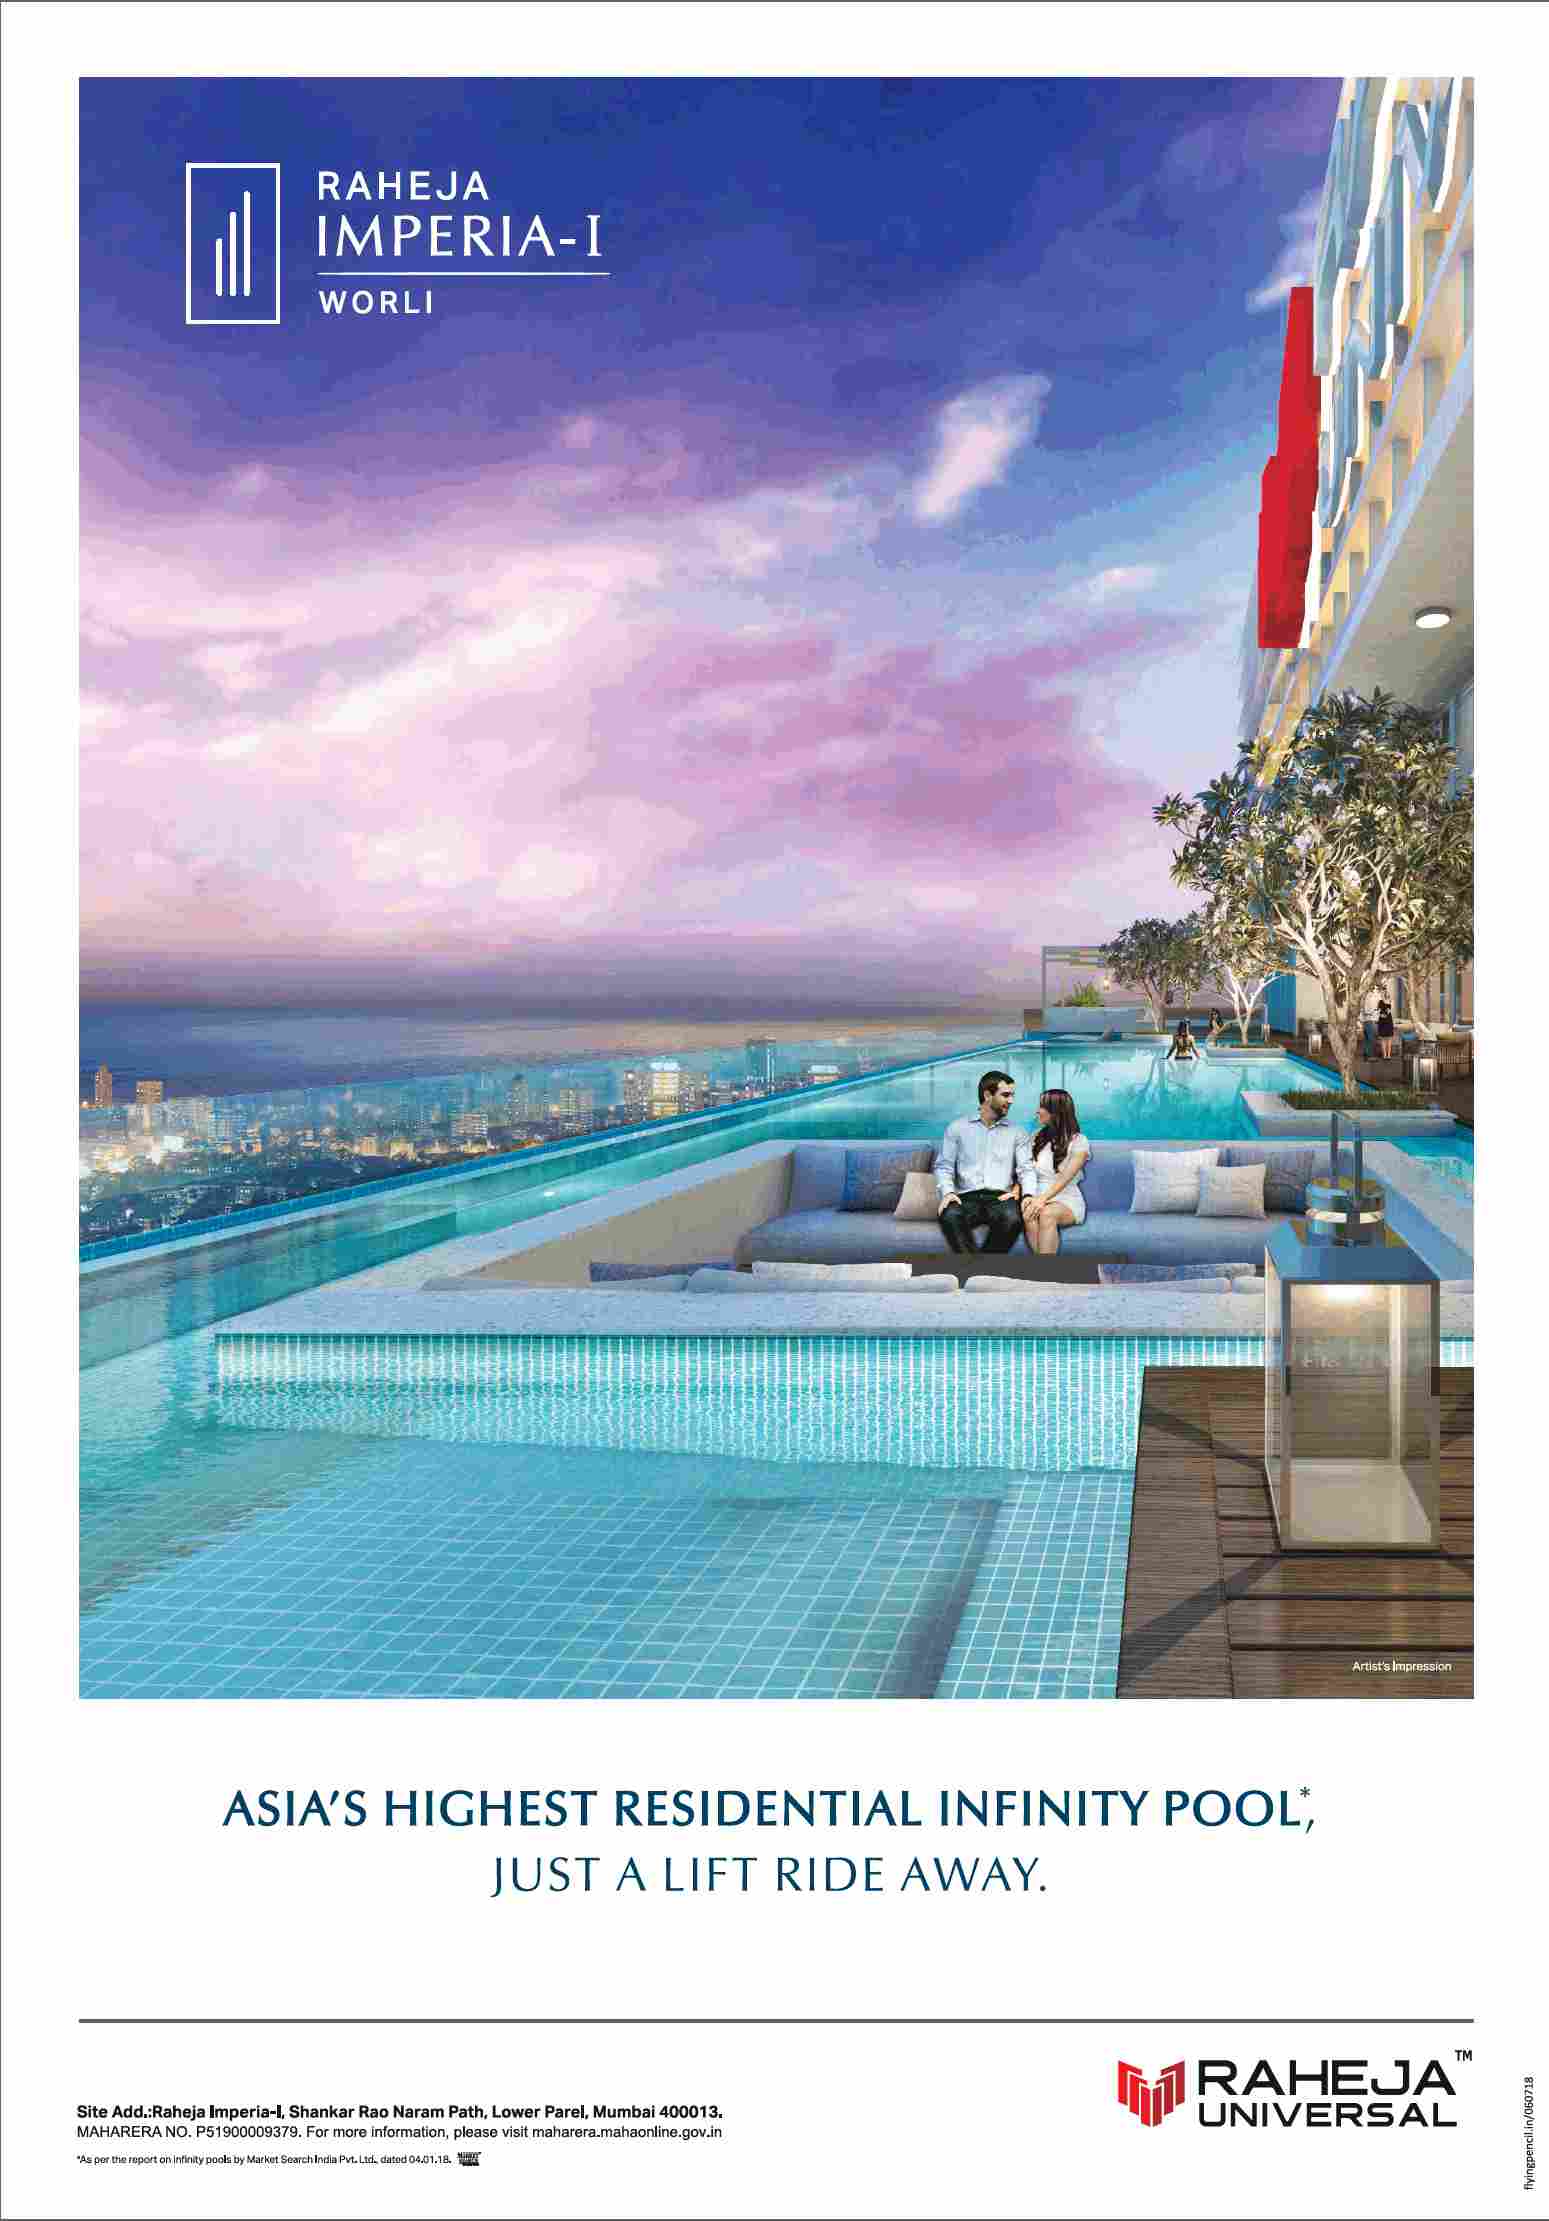 Enjoy a world of choice amenities that matches your lifestyle at Raheja Imperia in Mumbai Update